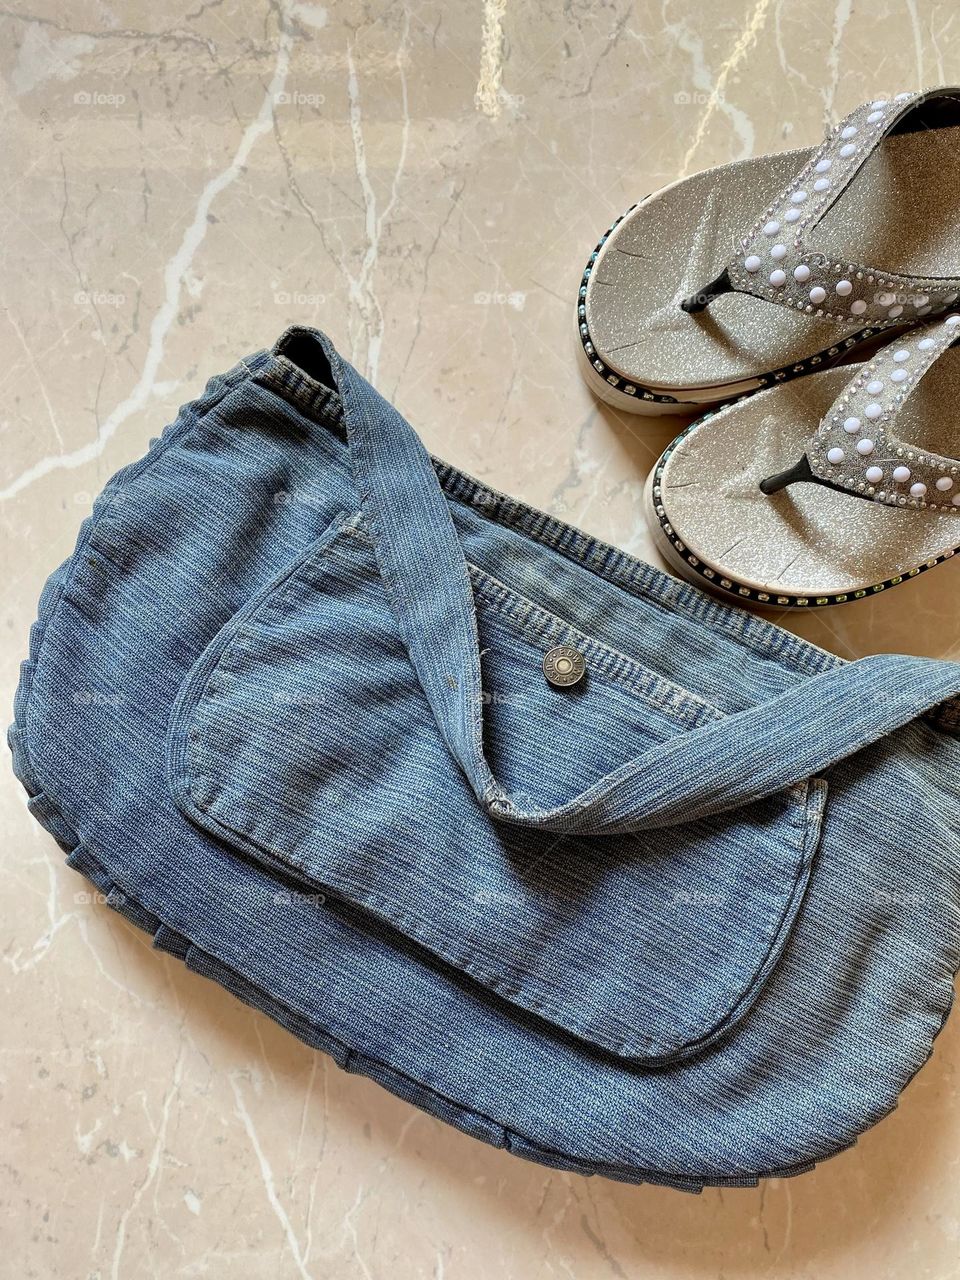 A handbag which I have made from an old trousers 